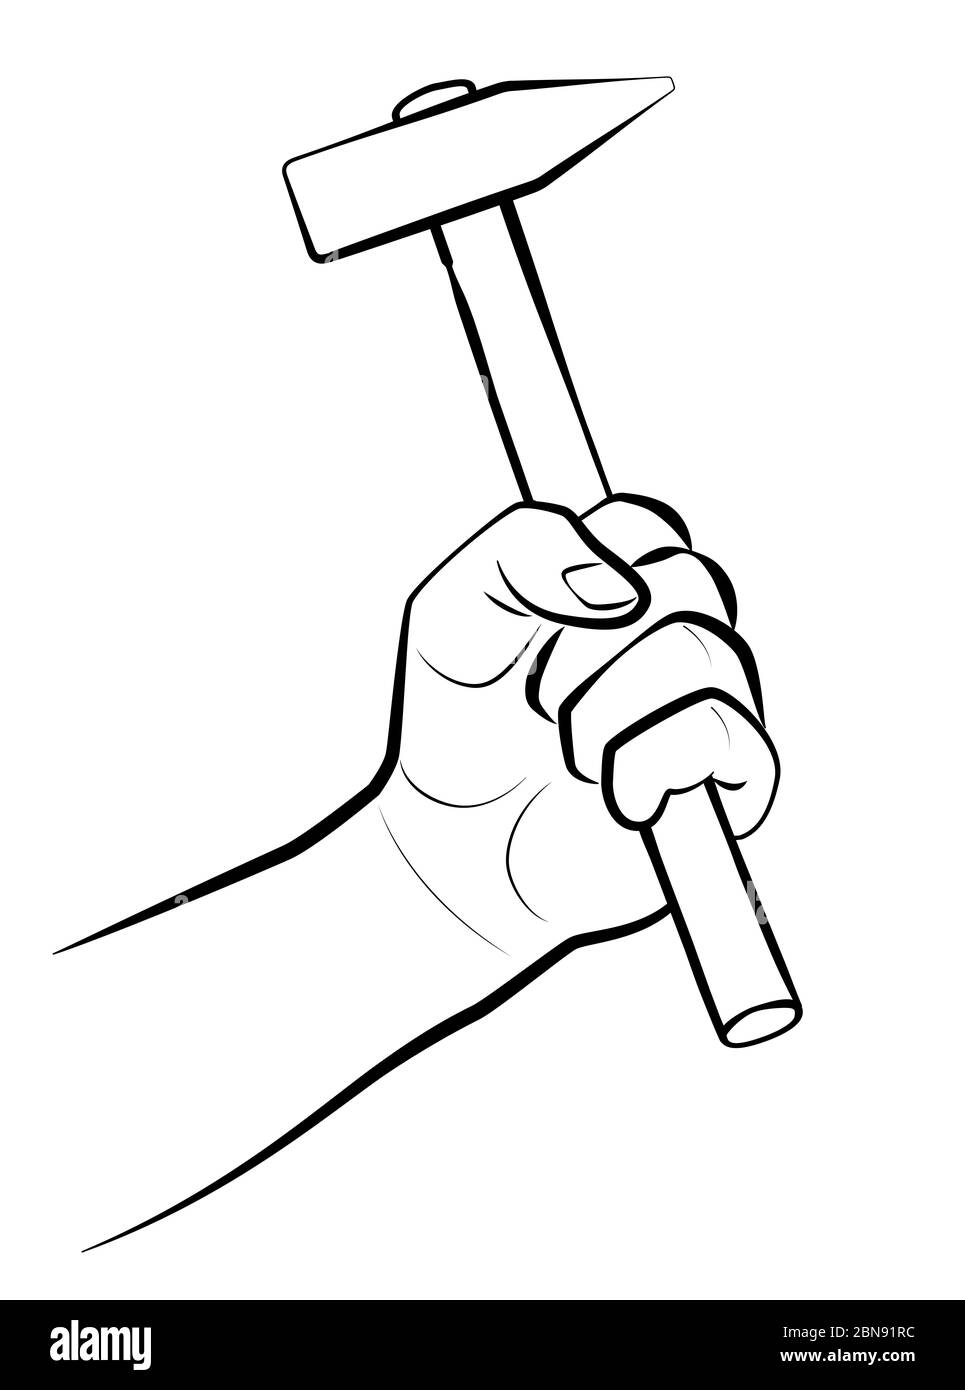 Male hand holding a hammer - comic outline illustration on white background. Stock Photo